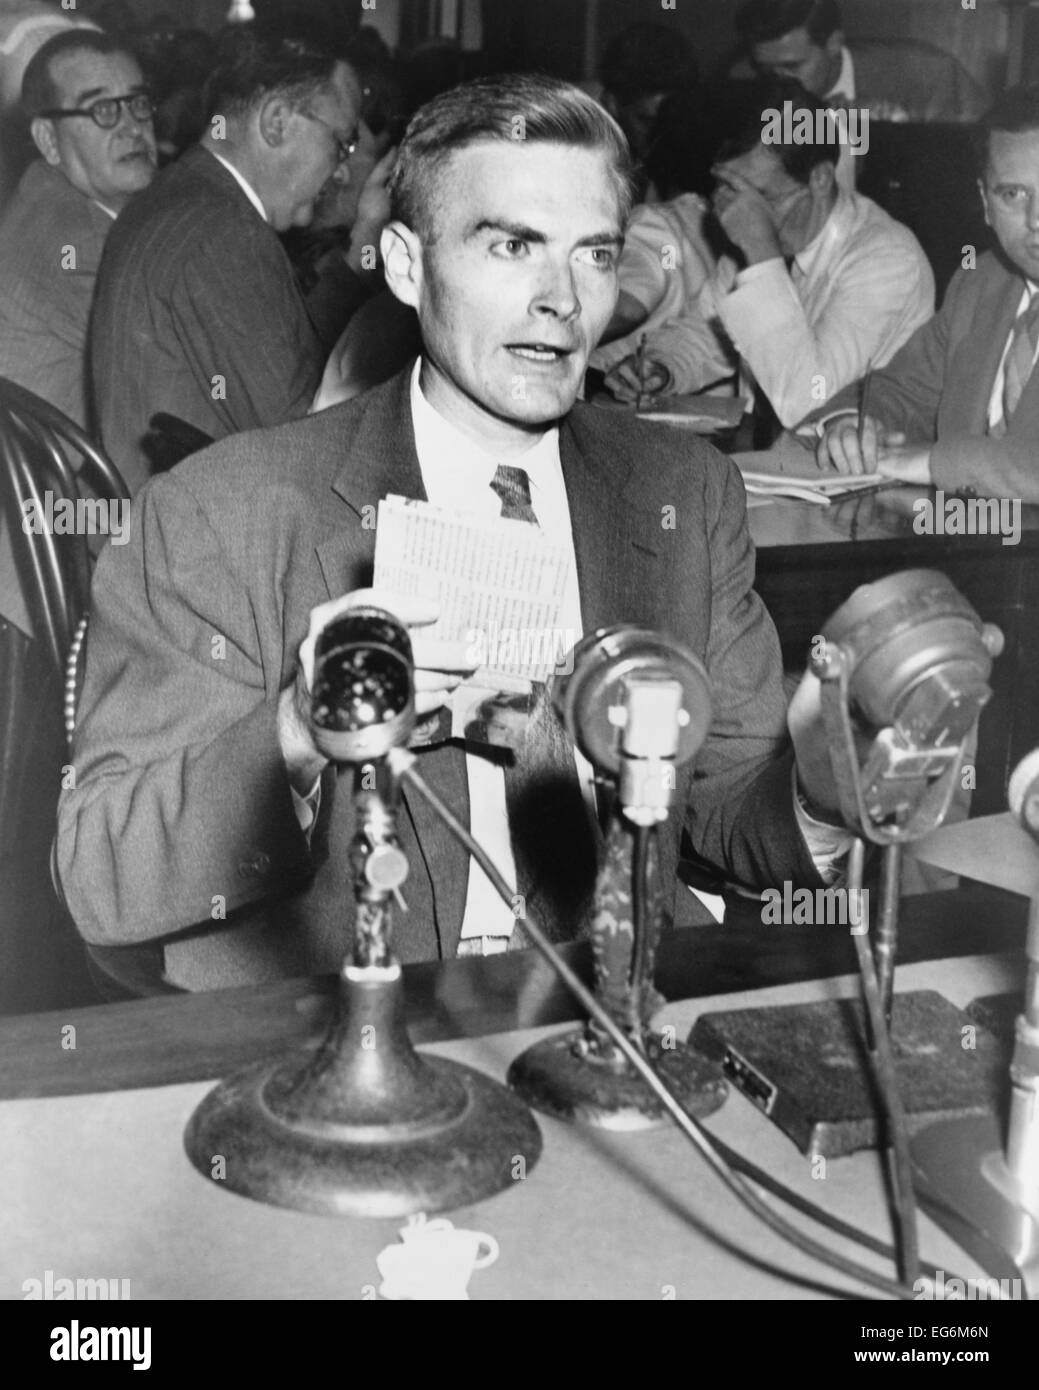 William Remington, testifying at a Senate investigation of communists in U.S. government in 1948. When he learned confessed spy Stock Photo